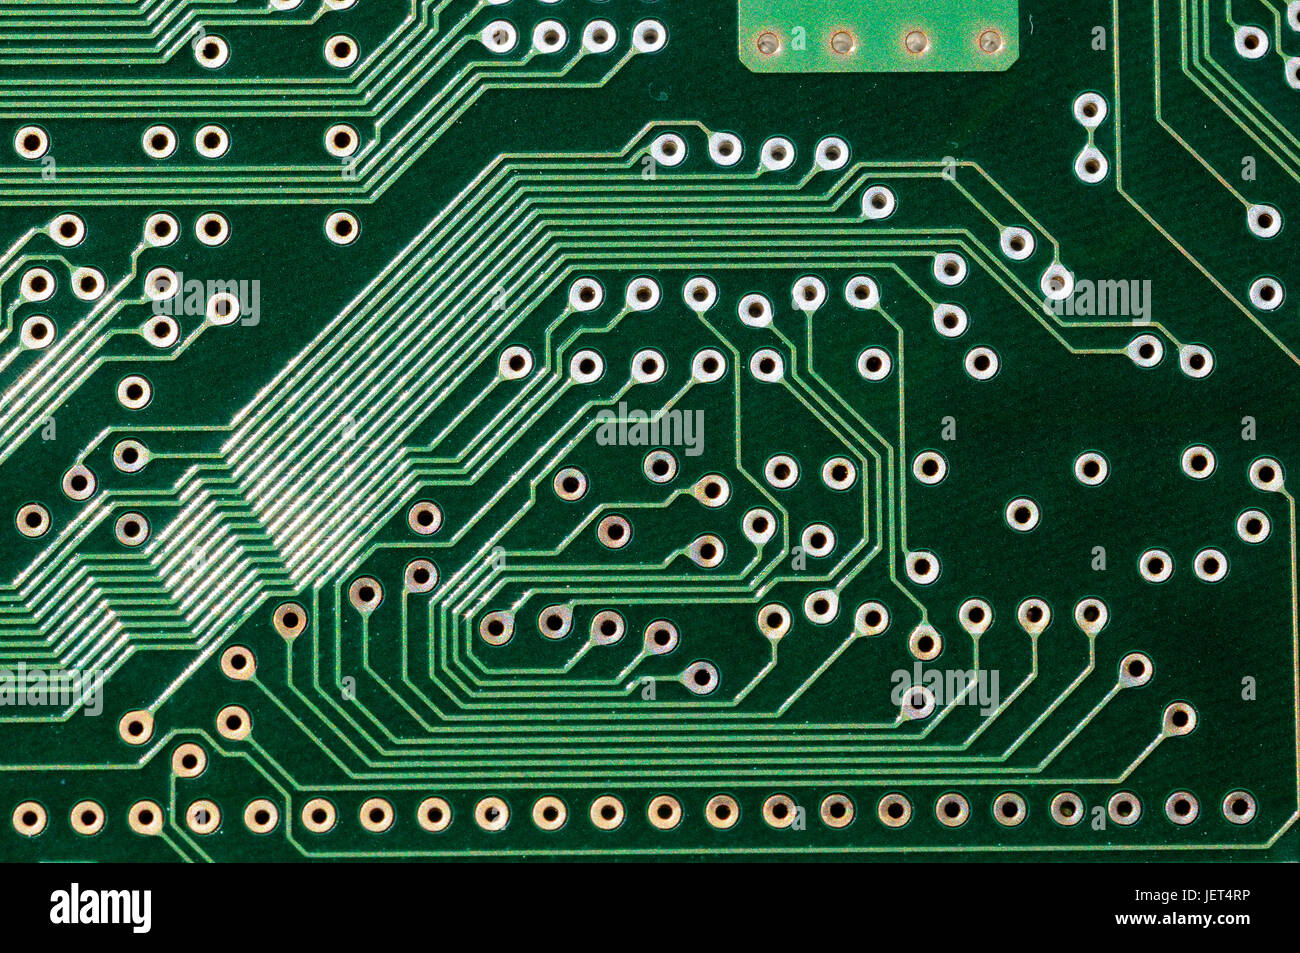 Electronic circuits of a computer Stock Photo